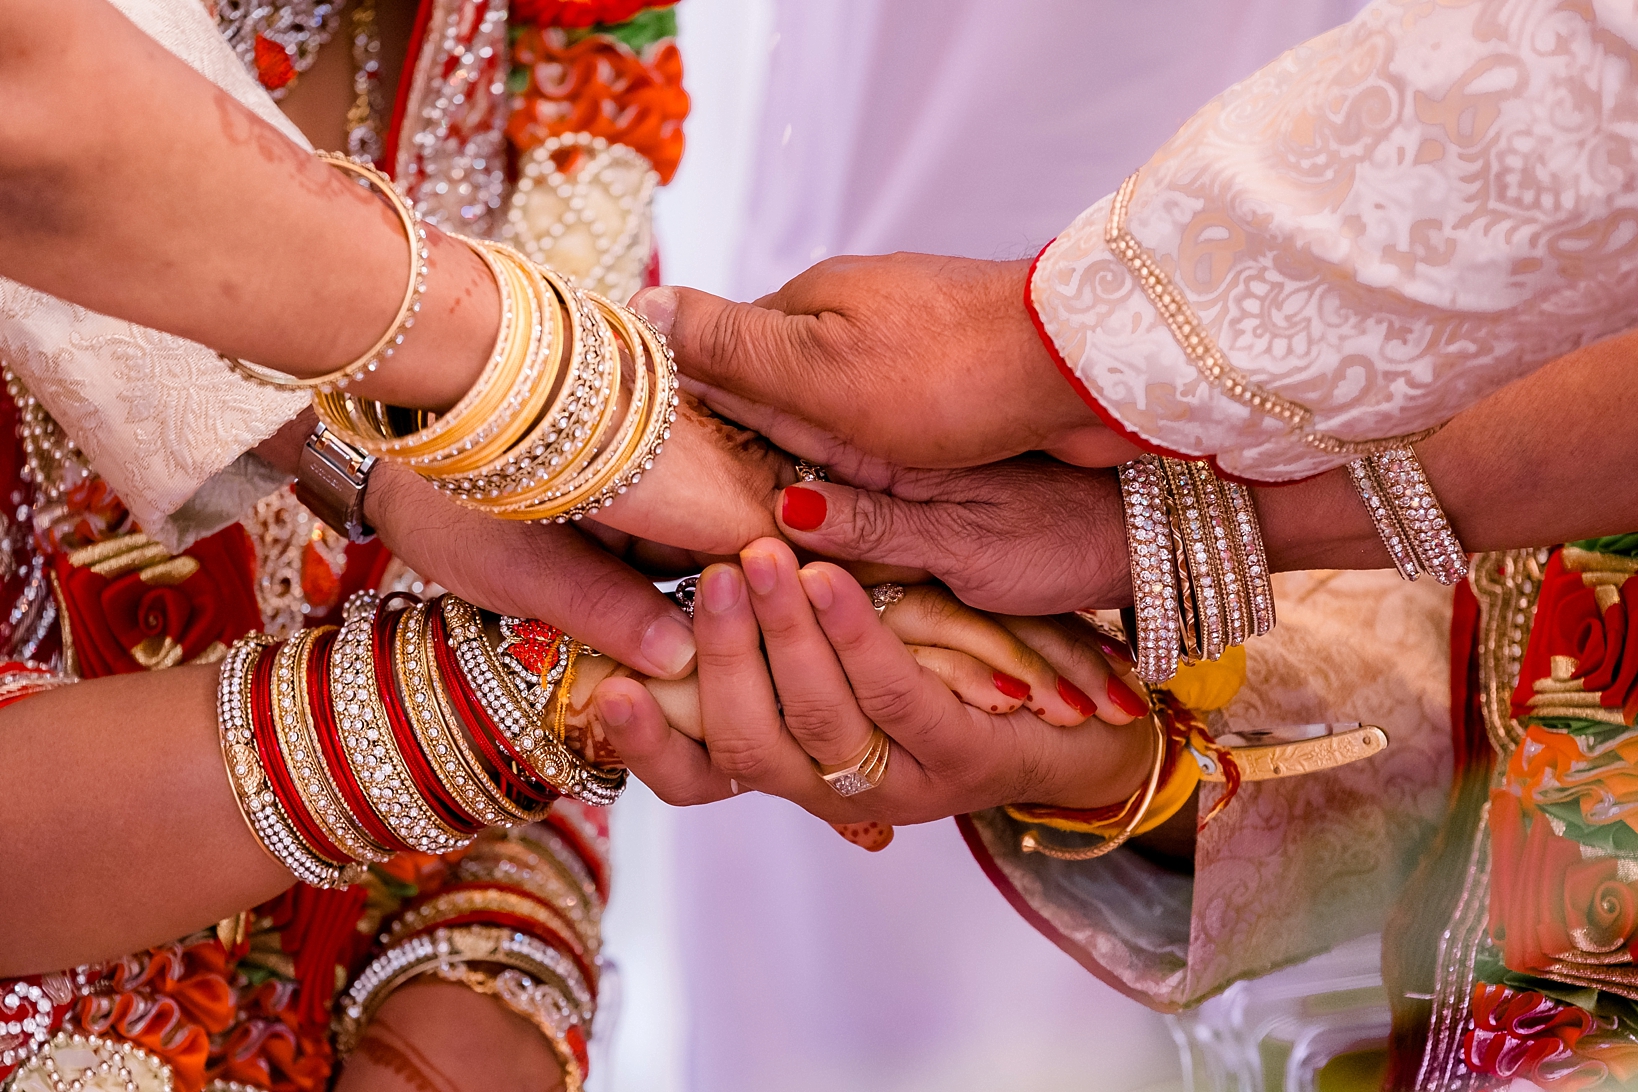 The hands of all the family members during the ceremony stacked on top of each other by Sarah & Ben Photography